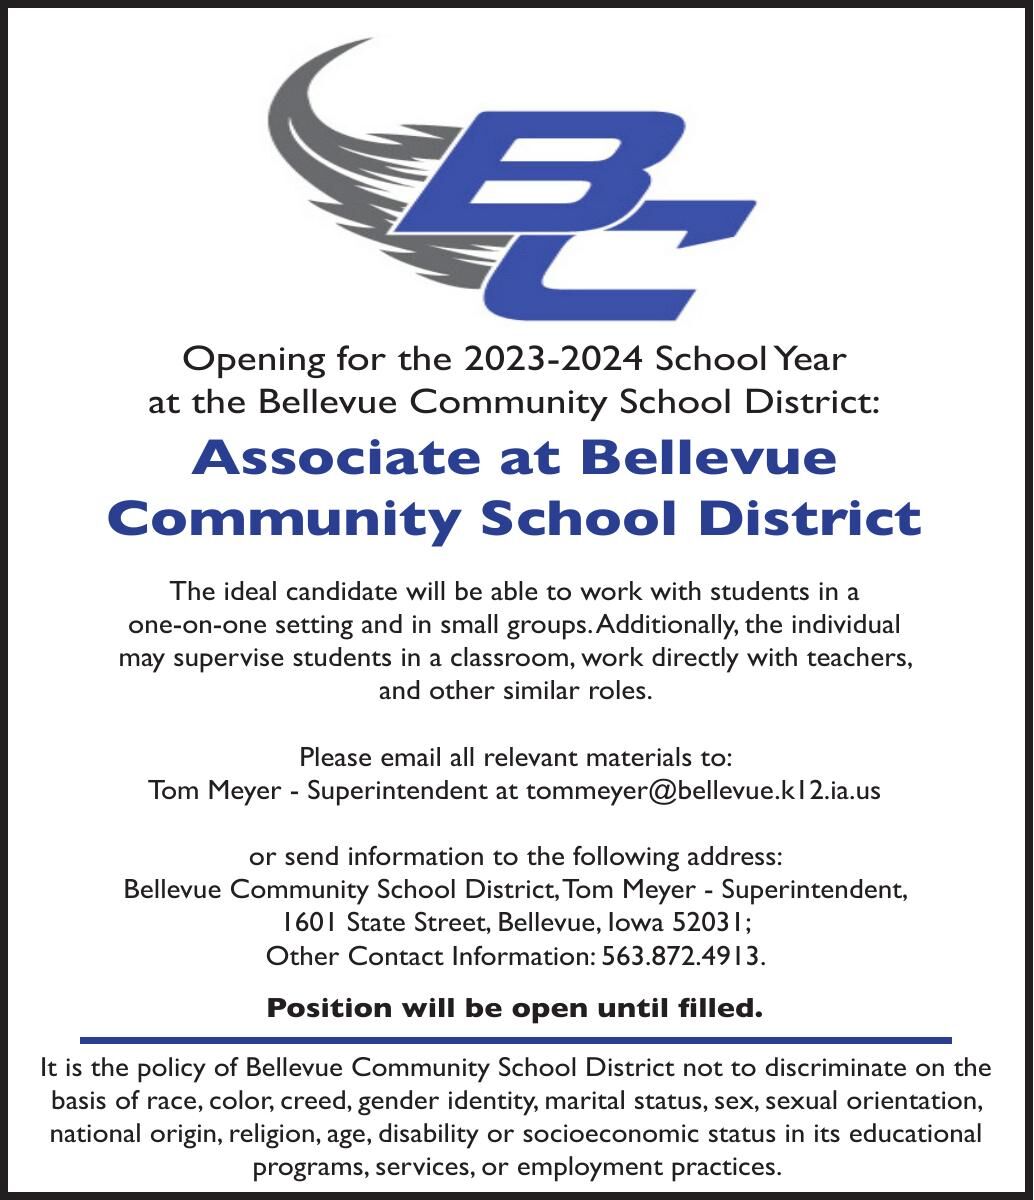 Opening for the 2023-2024 School Year: Associate at Bellevue Community School District